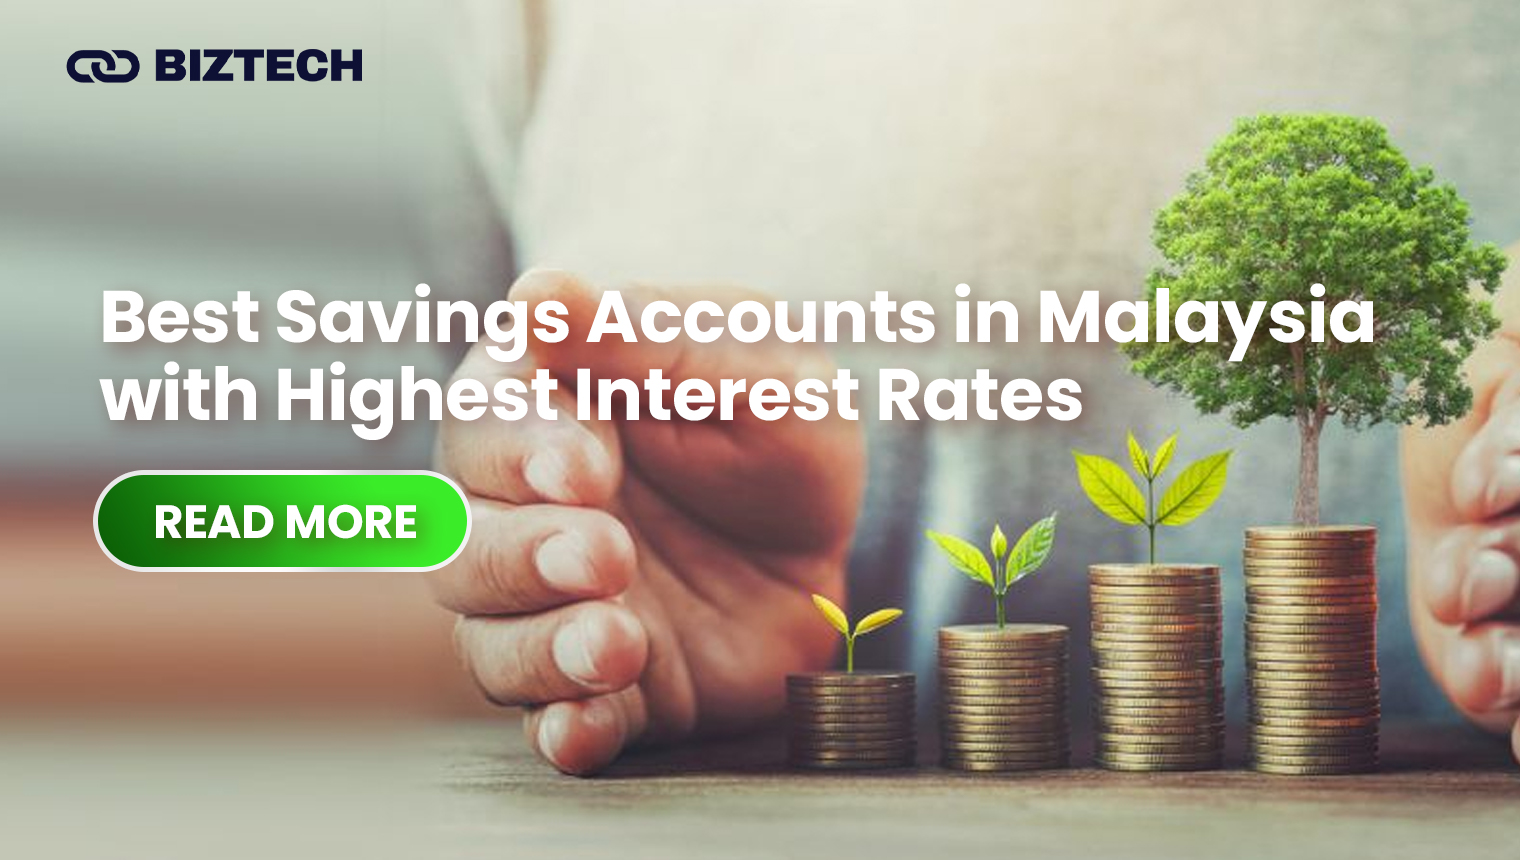 Best Savings Accounts in Malaysia with Highest Interest Rates